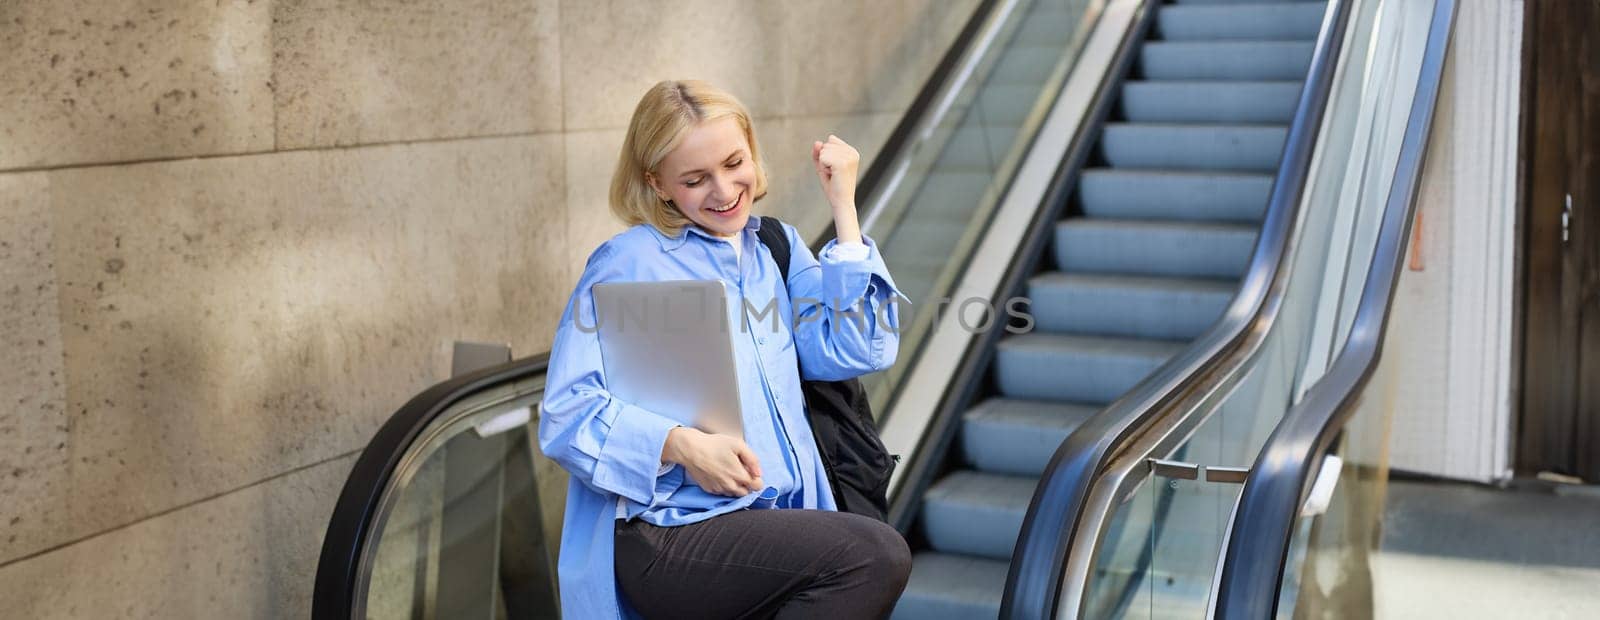 Excited young blond woman with backpack and laptop, says yes, winning, celebrating victory, achieve goal, posing near escalator by Benzoix